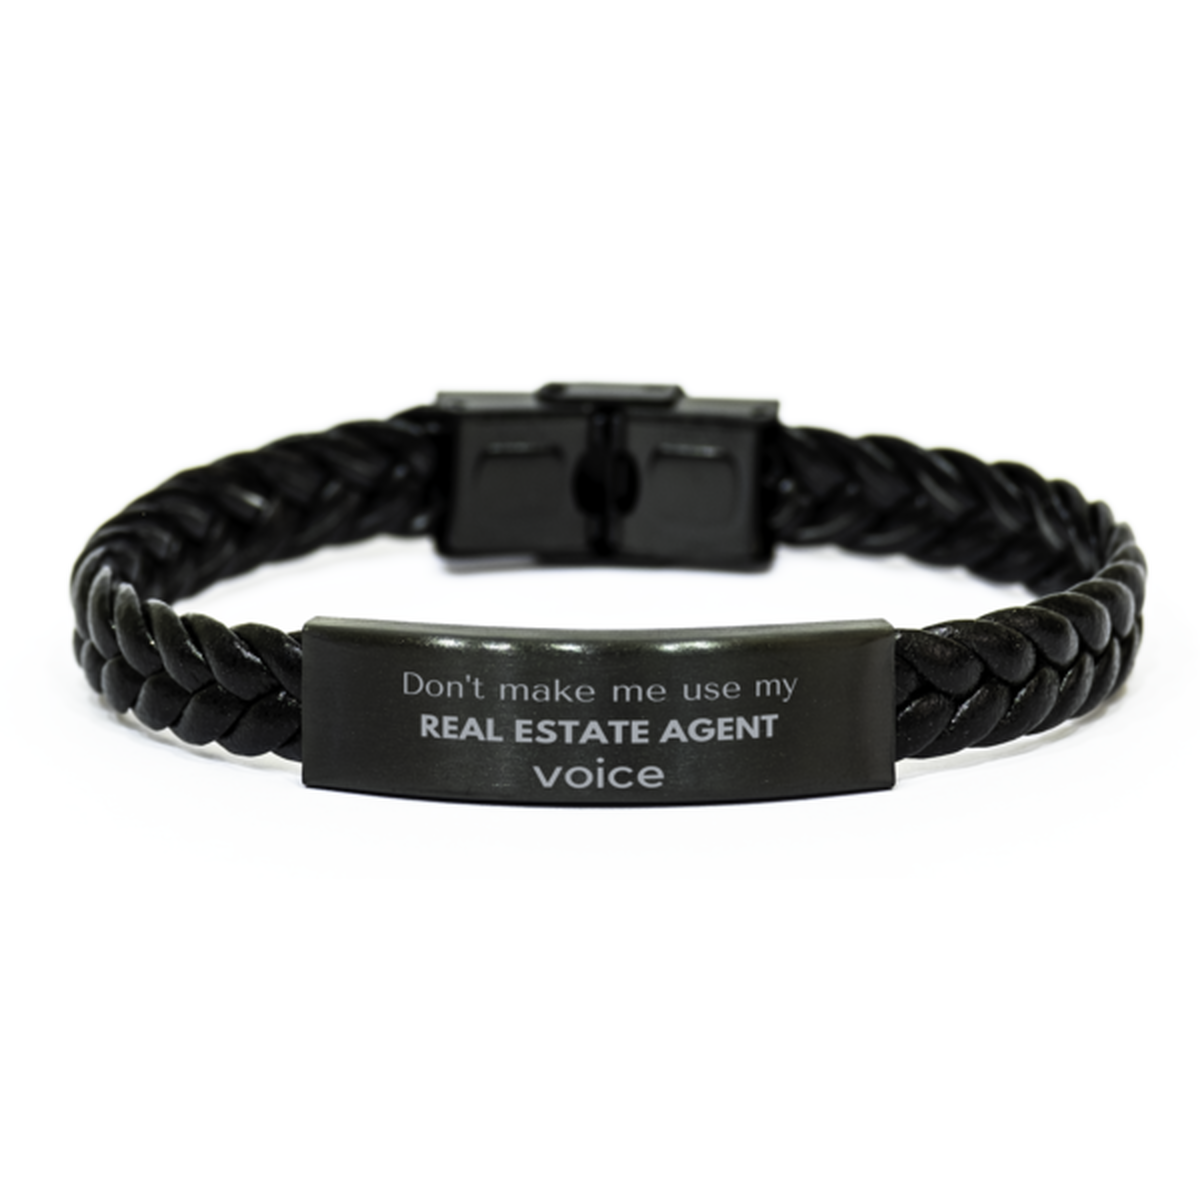 Don't make me use my Real Estate Agent voice, Sarcasm Real Estate Agent Gifts, Christmas Real Estate Agent Braided Leather Bracelet Birthday Unique Gifts For Real Estate Agent Coworkers, Men, Women, Colleague, Friends